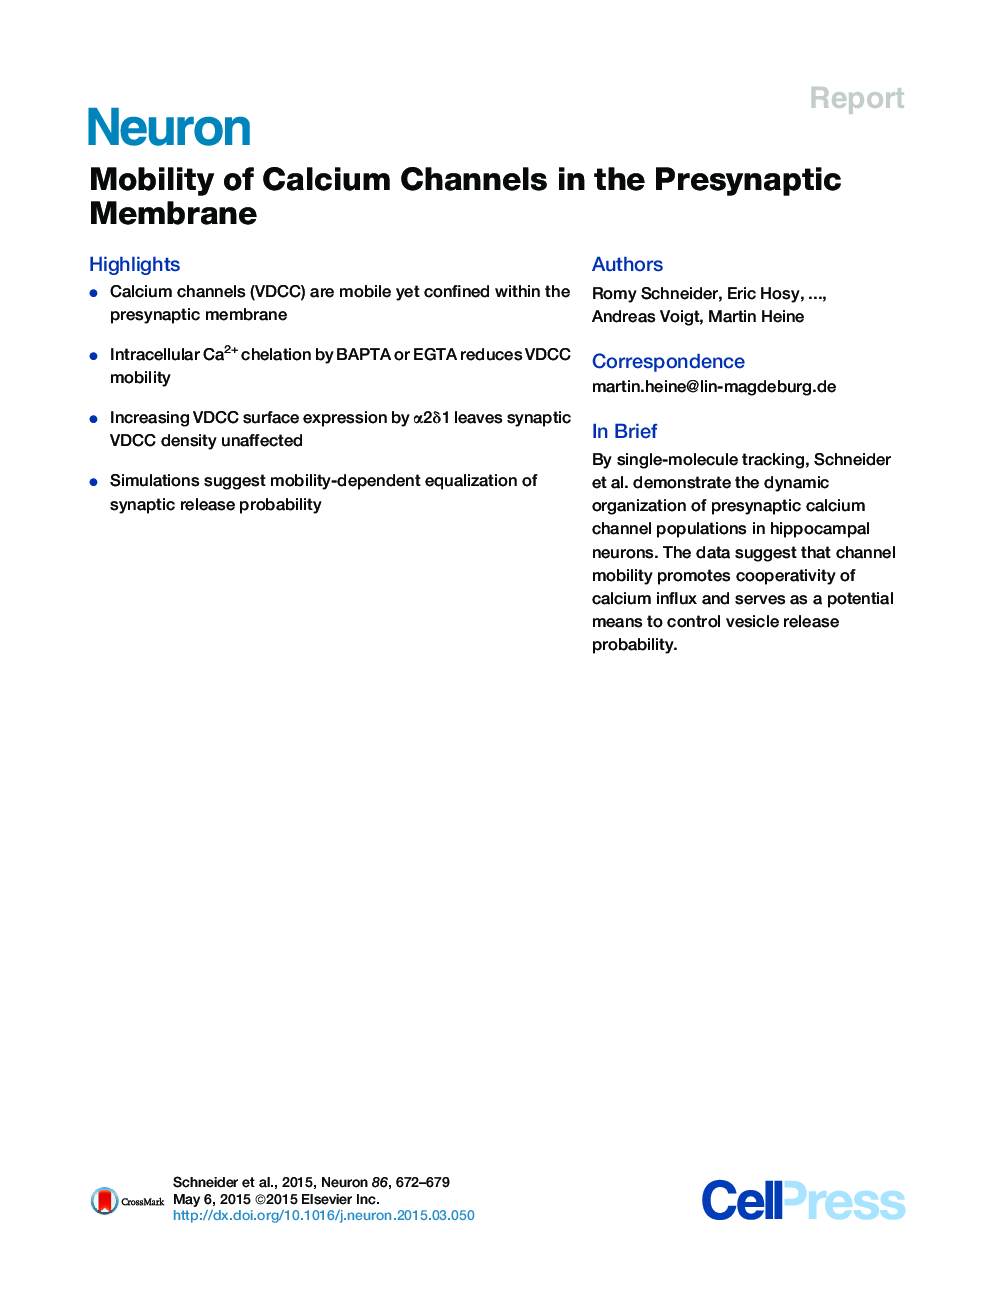 Mobility of Calcium Channels in the Presynaptic Membrane